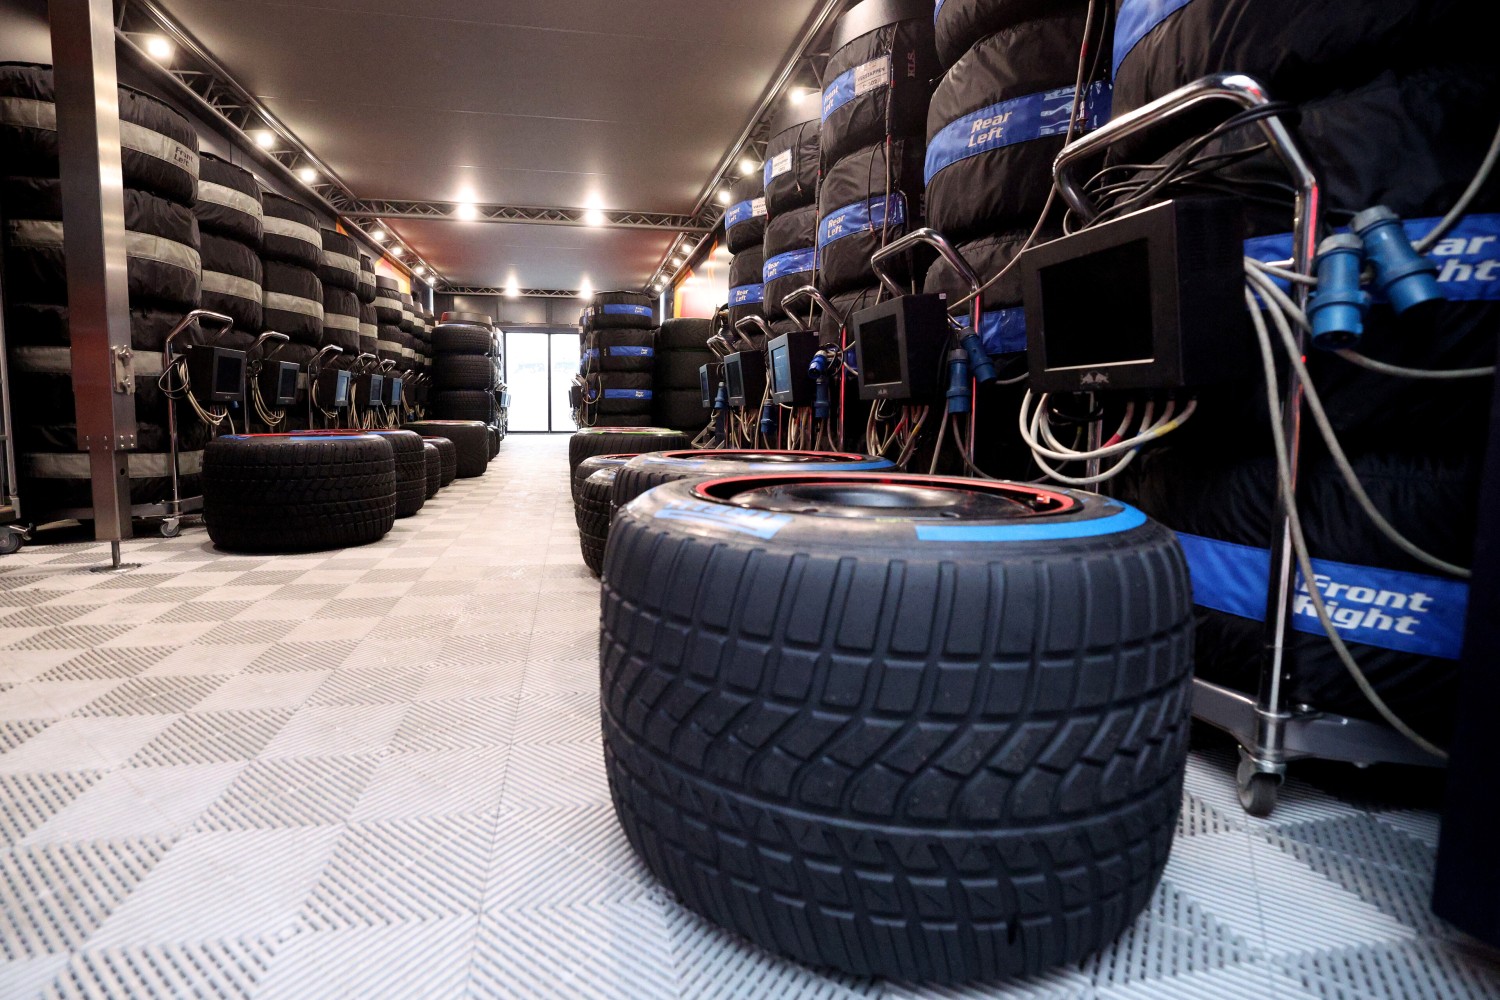 Wet tires are seen in the Red Bull Racing garage during previews ahead of the F1 Grand Prix of The Netherlands at Circuit Zandvoort on August 24, 2023 in Zandvoort, Netherlands. (Photo by Dean Mouhtaropoulos/Getty Images) // Getty Images / Red Bull Content Pool